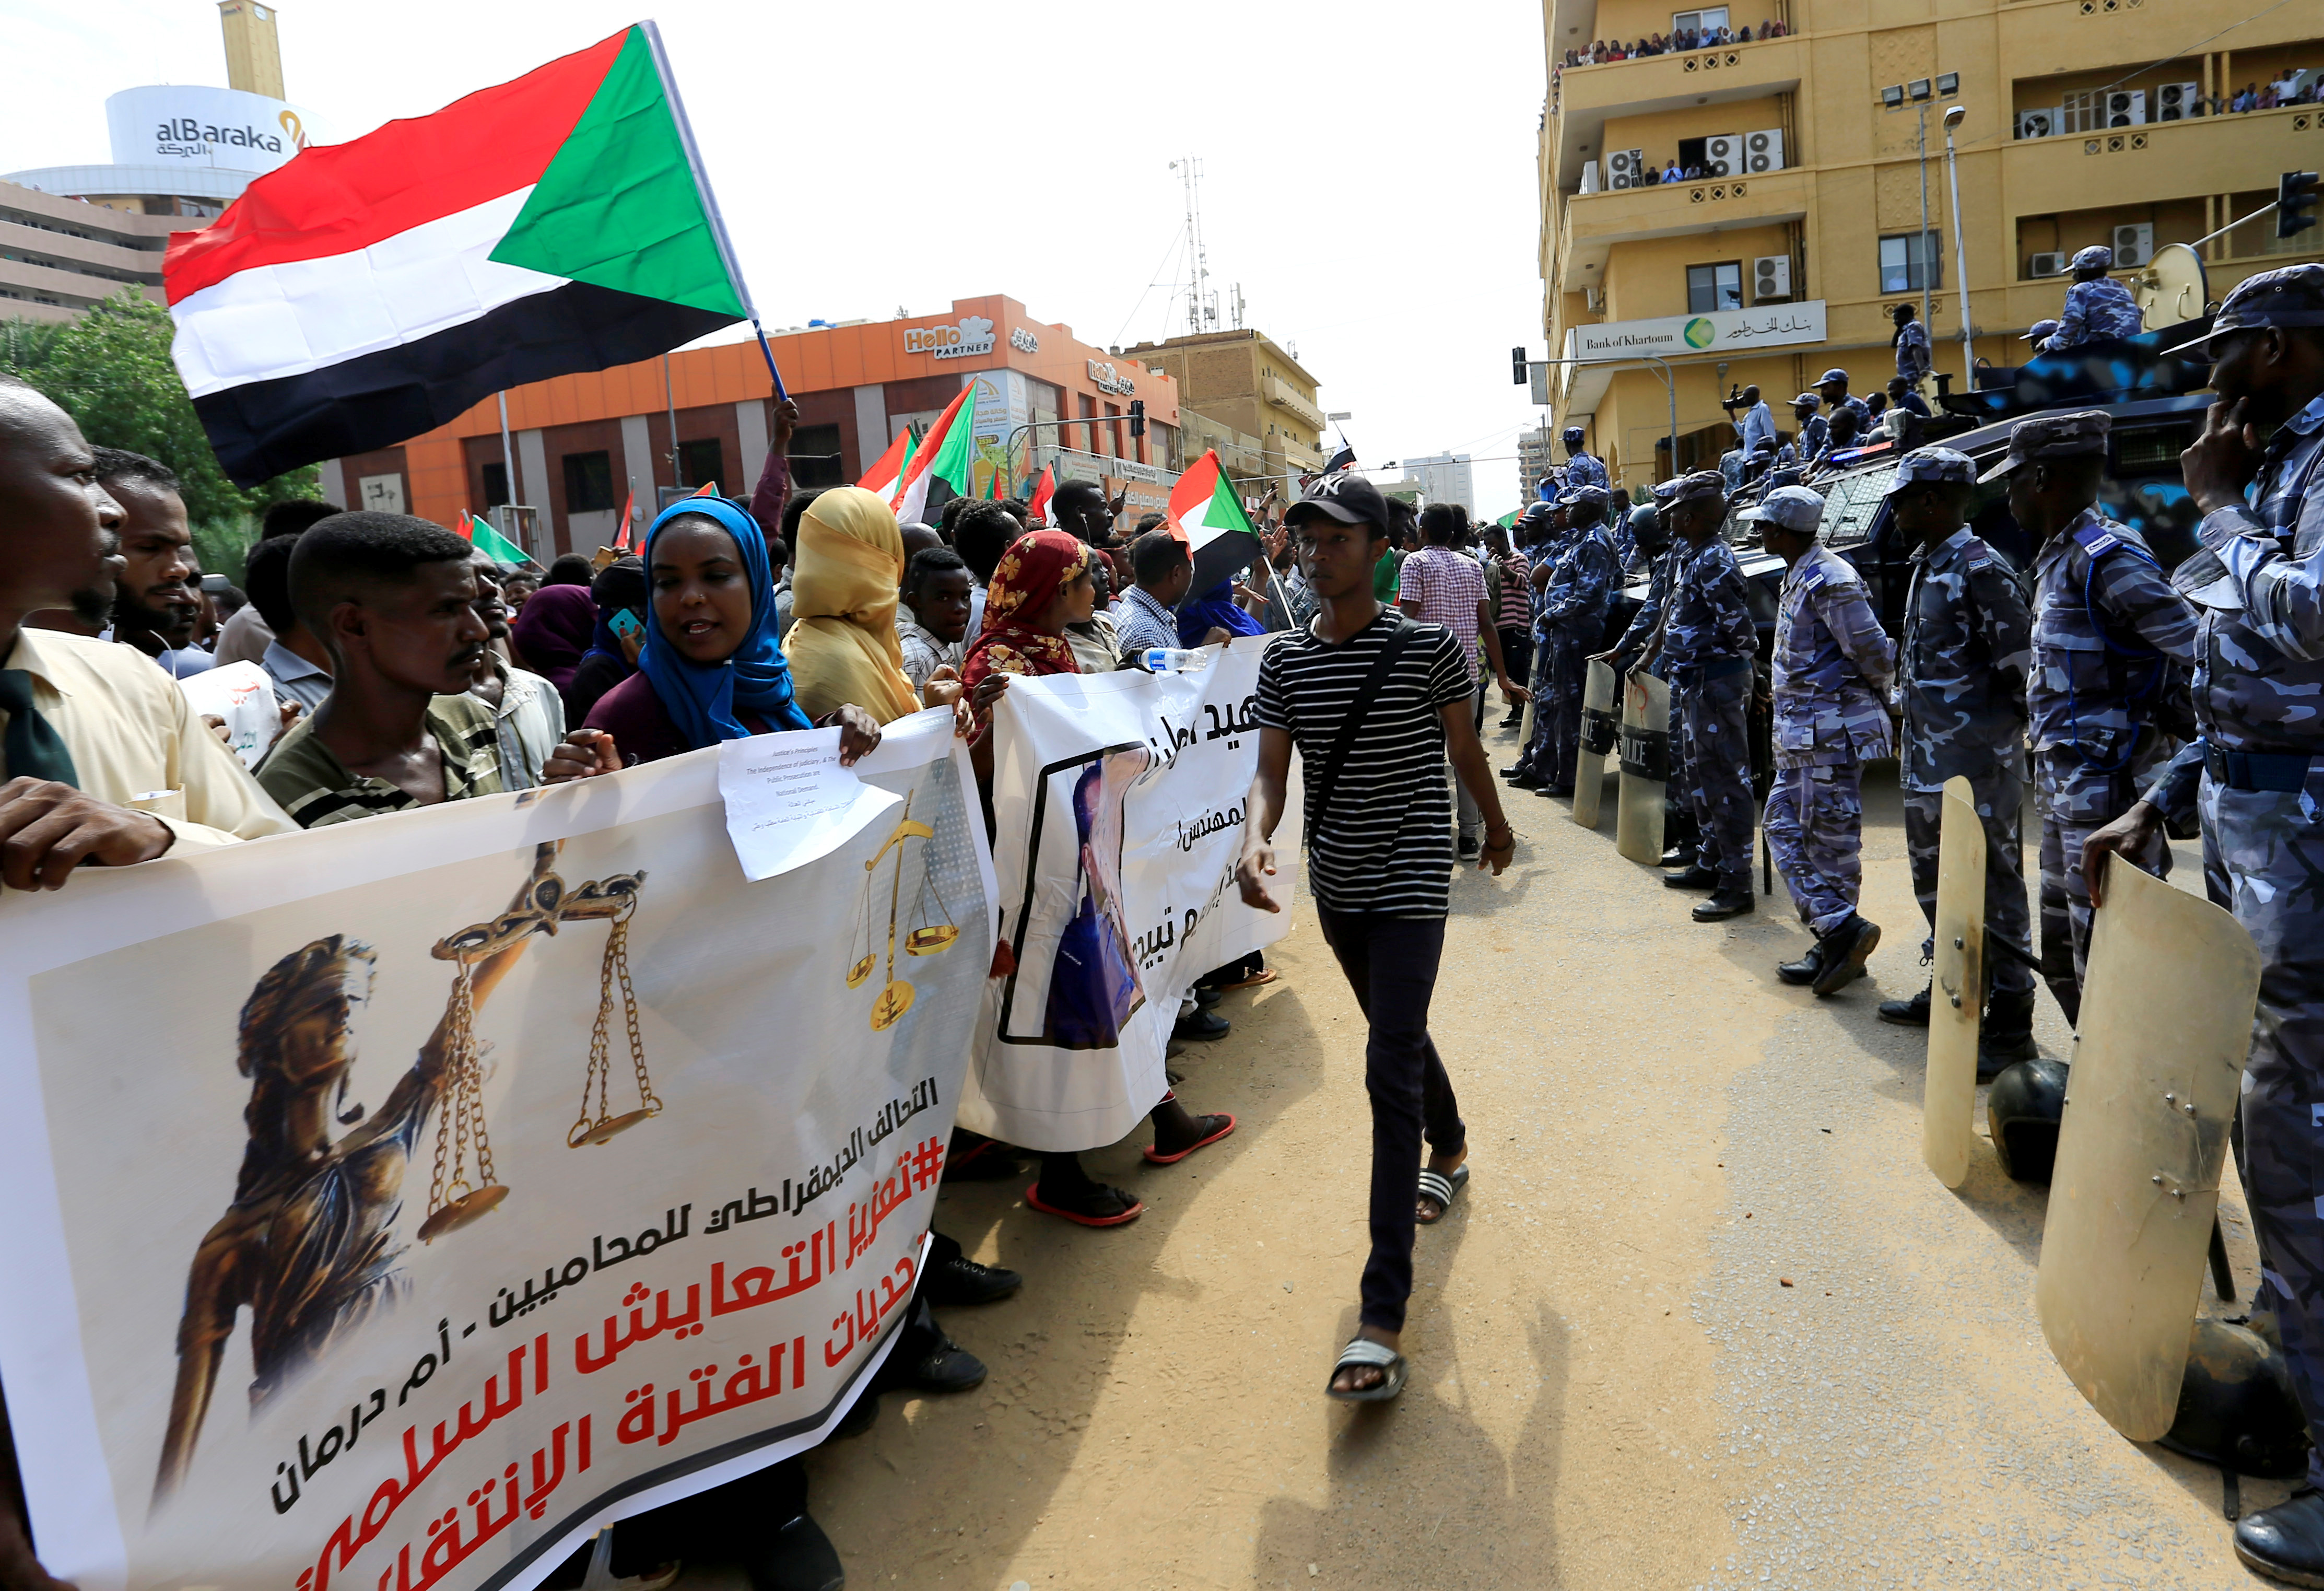 Sudanese demonstrators attend a protest calling for the appointment of top judicial officials and justice for killed demonstrators, outside the presidential palace in Khartoum